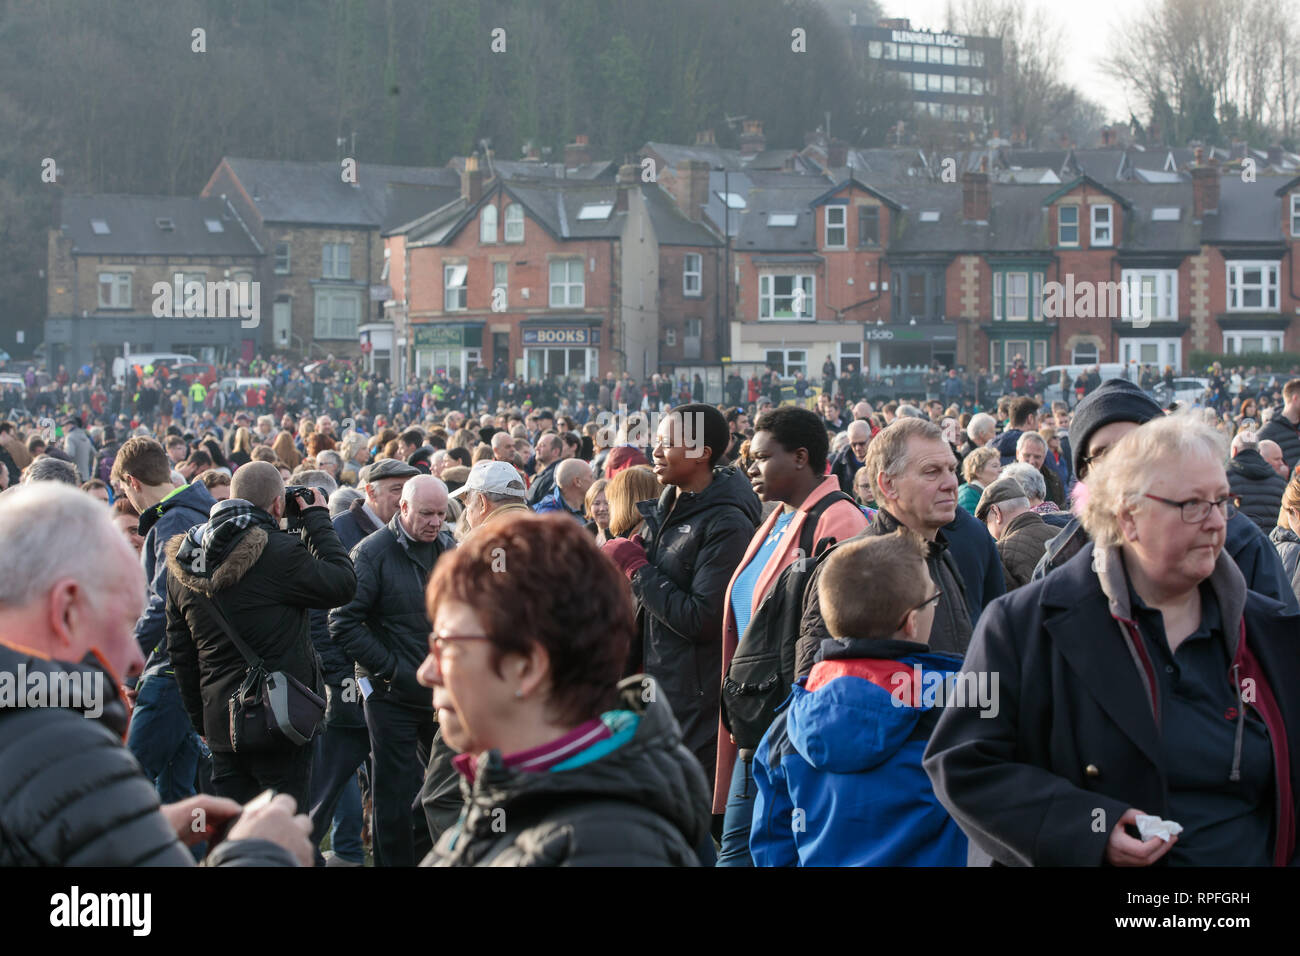 Mi Amigo 75th anniversary, Endcliffe Park, Sheffield, Yorkshire, England. February 22nd 2019. Thousands of people gather in the city's Endcliffe Park to honour the 10 man crew of the B-17 flying fortress, 'Mi Amigo', which crashed there 75 years ago. The plane was hit during a bombing raid over Denmark. It limped back to England, but crashed killing the entire crew, when the pilot deliberately ditched in a wooded area beside the park in order to avoid children who were playing there. A service was held, followed by a fly-past of British and  US aircraft. Copyright Ian Wray/Alamy Live news Stock Photo